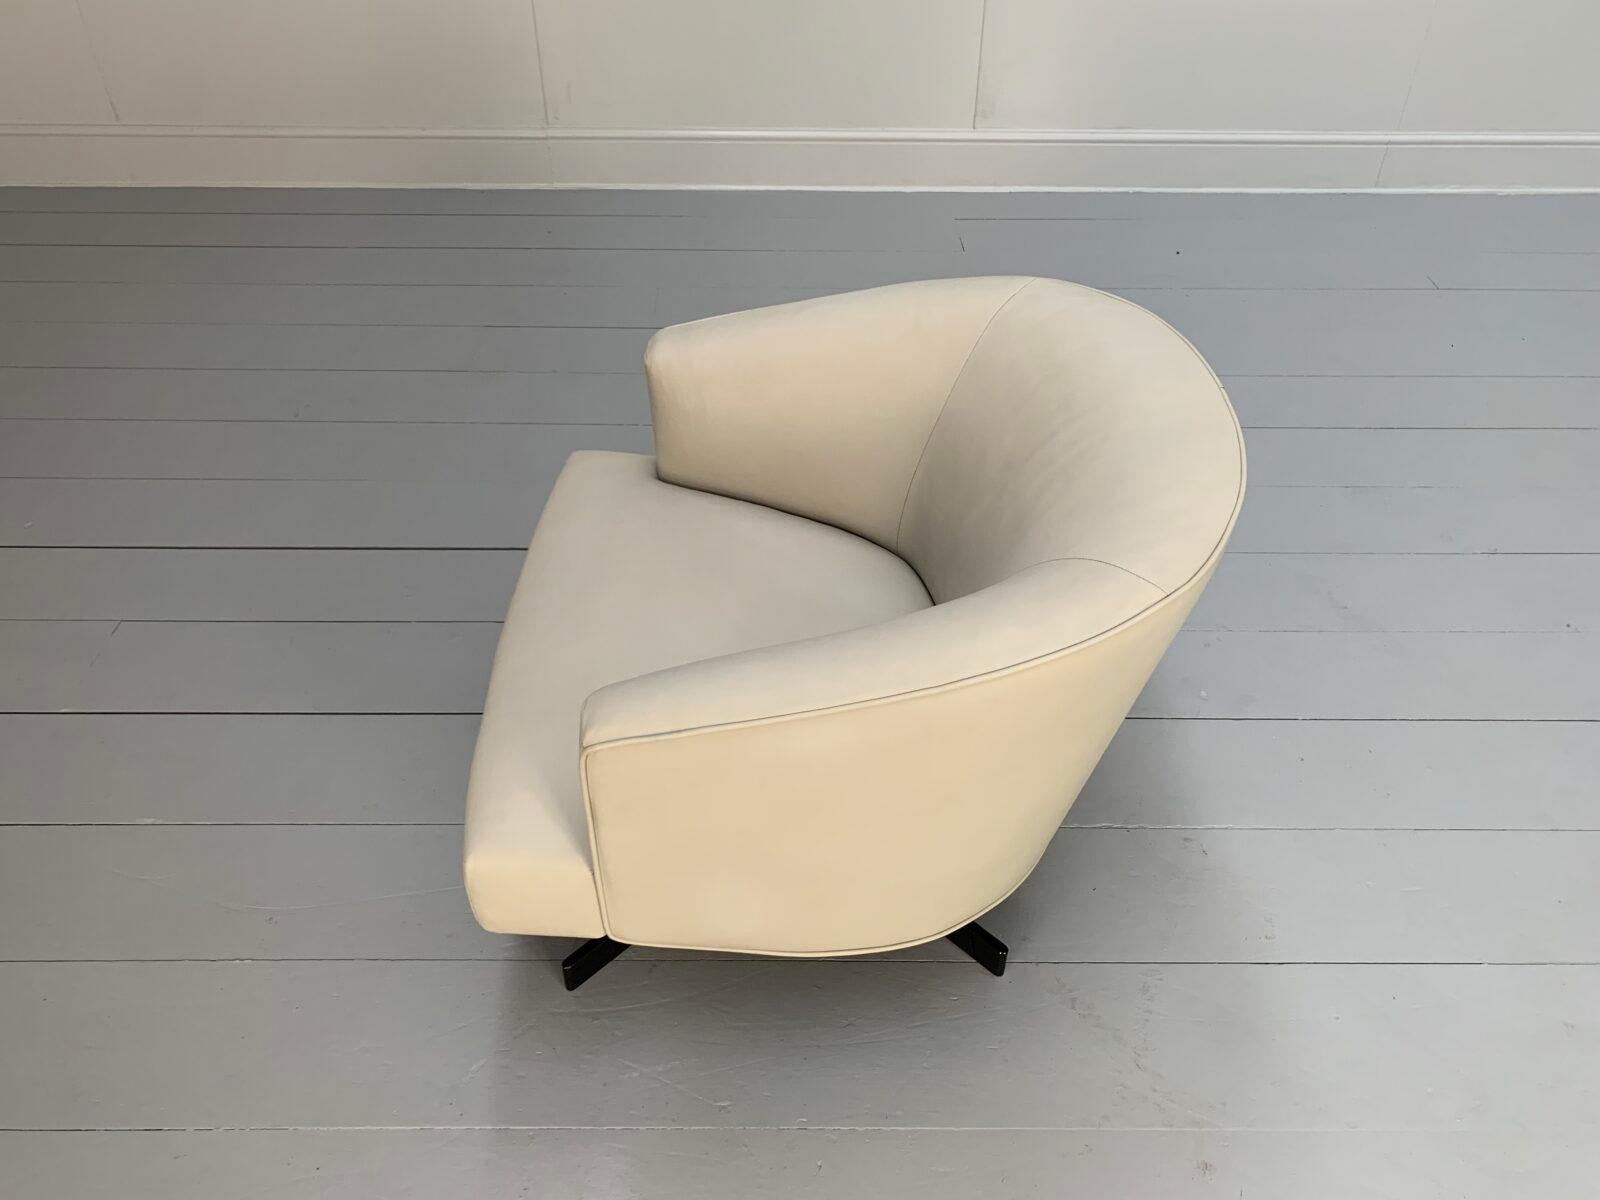 Minotti “Martin” Armchair – In Ivory “Pelle” Leather For Sale 3